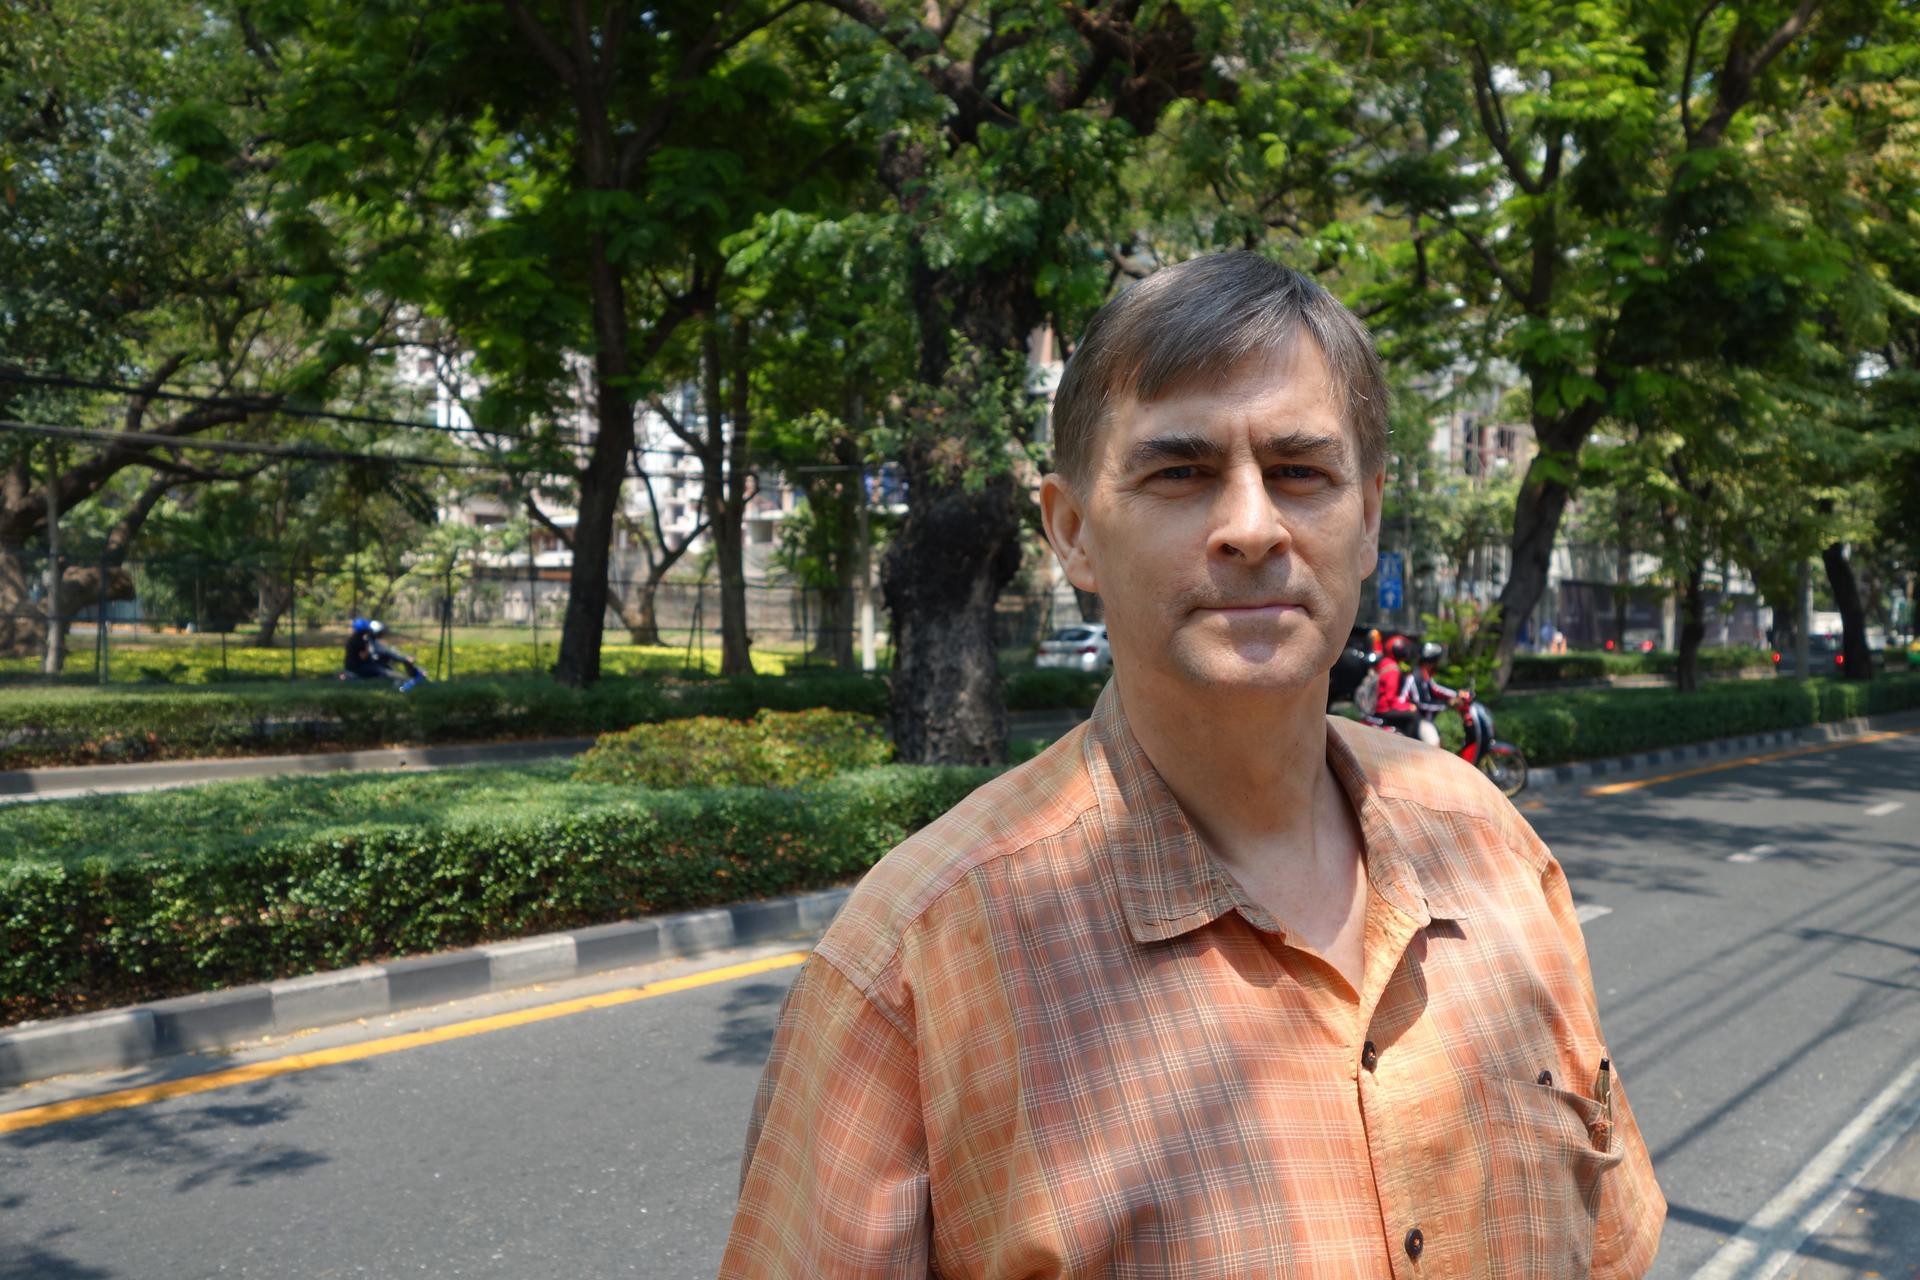 Australian journalist Ron Corben has lived in and reported on Thailand since 1989.